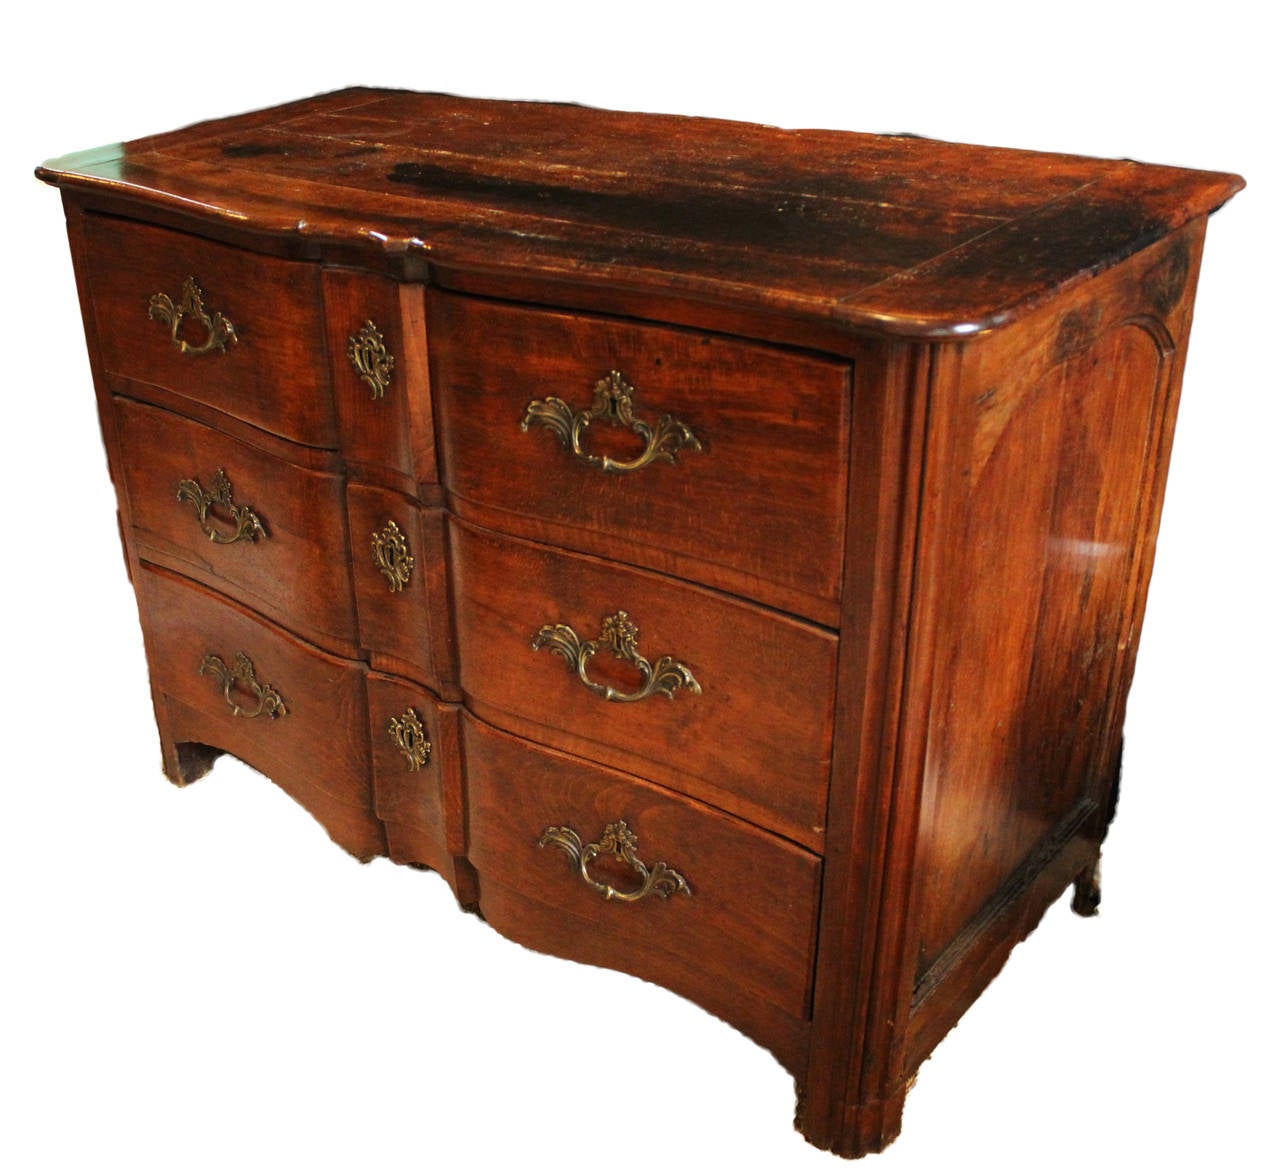 Dark walnut serpentine carved commode with four drawers, original handcrafted ormolu and escutcheons, circa 18th century, France.